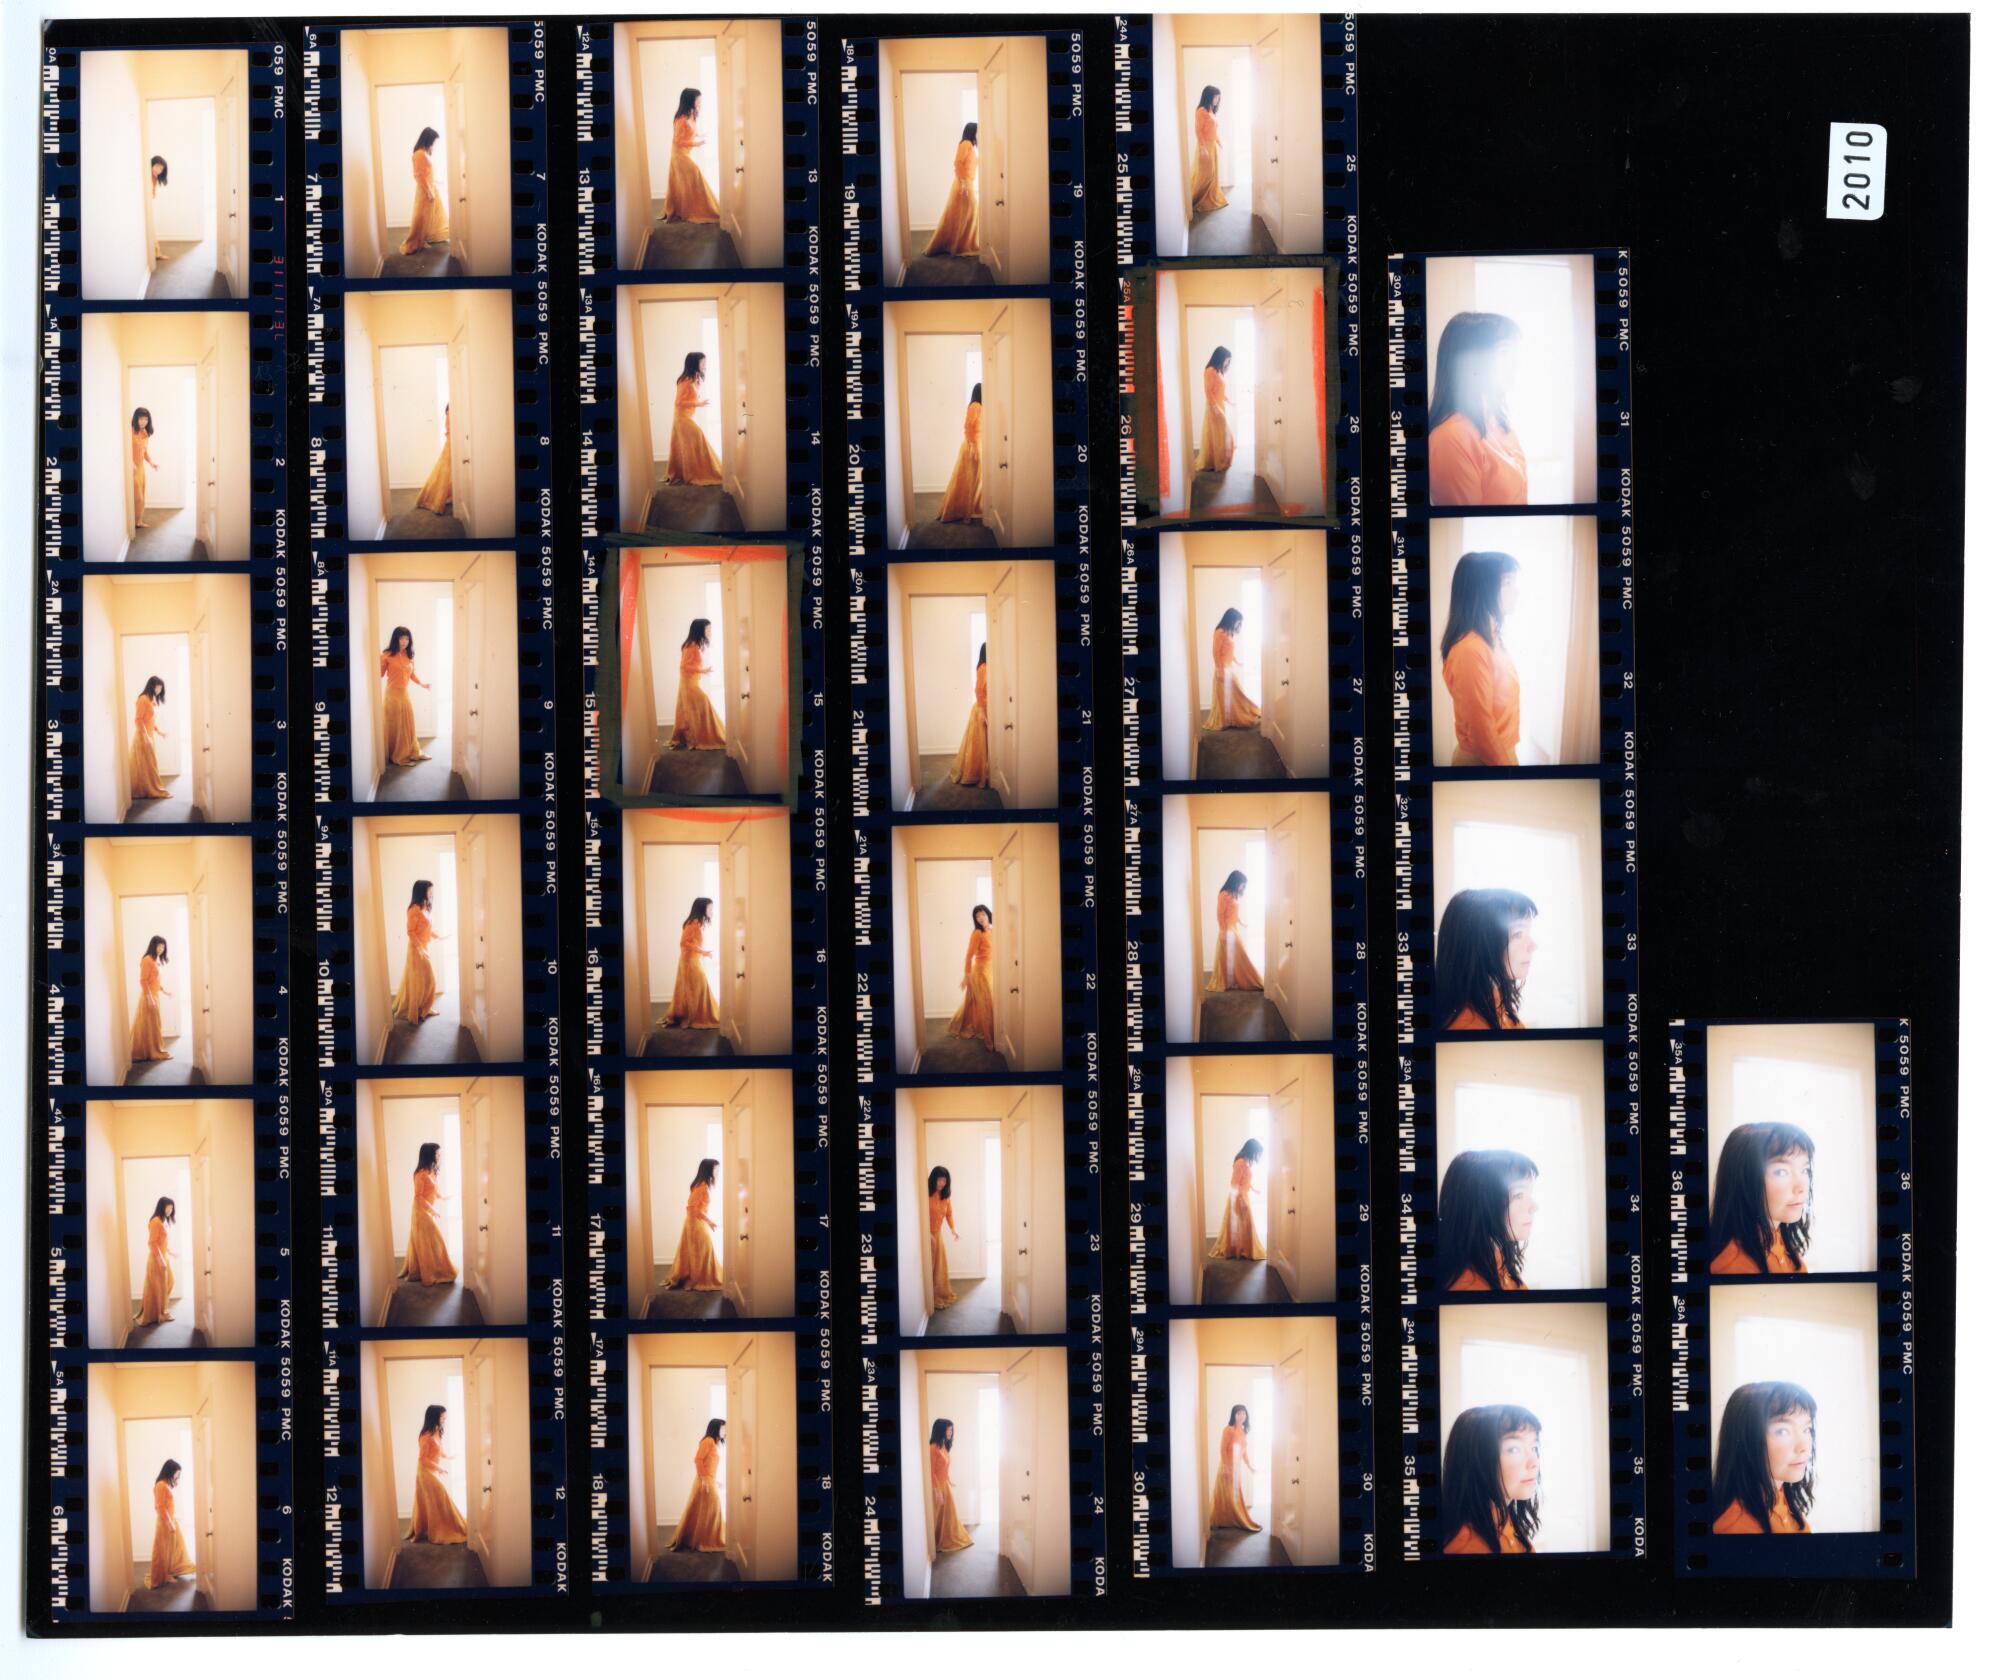 A contact sheet with photos of Björk in a hallway.